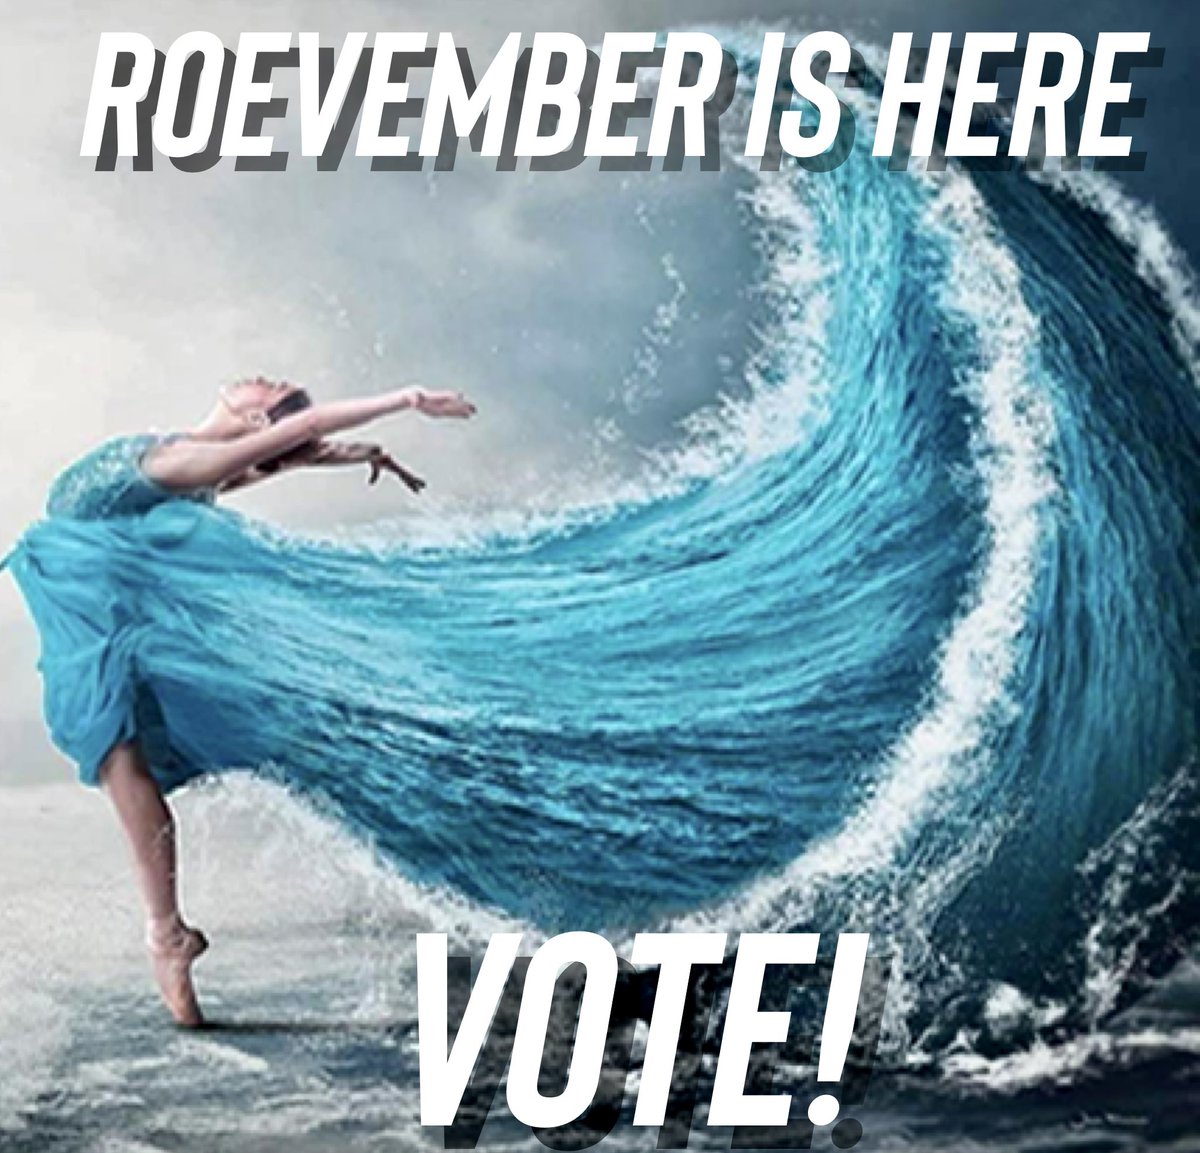 The blue wave is here, and she's pissed. #VOTE #roevember #janmcdowellforcongress #womensrights #fliptx24